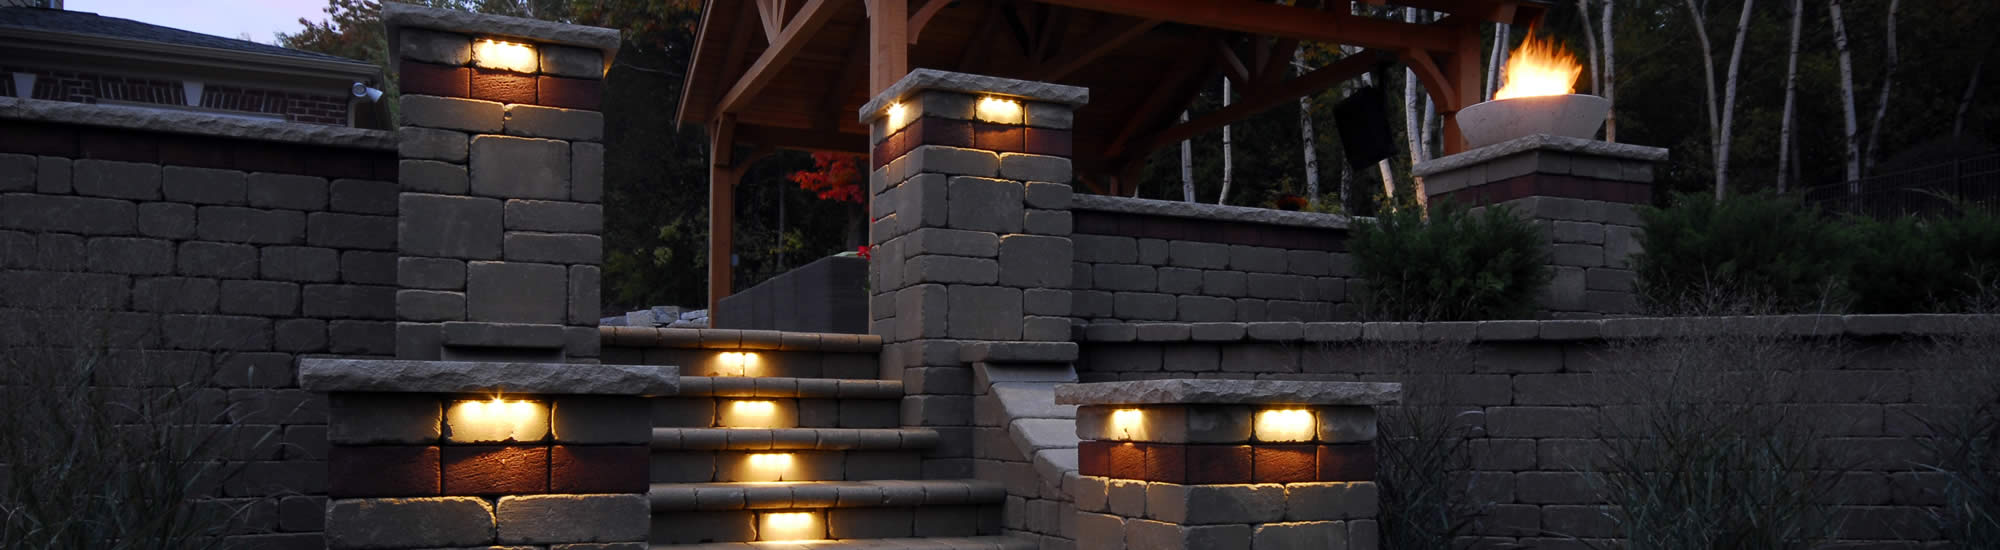 Retaining Wall Construction and Design